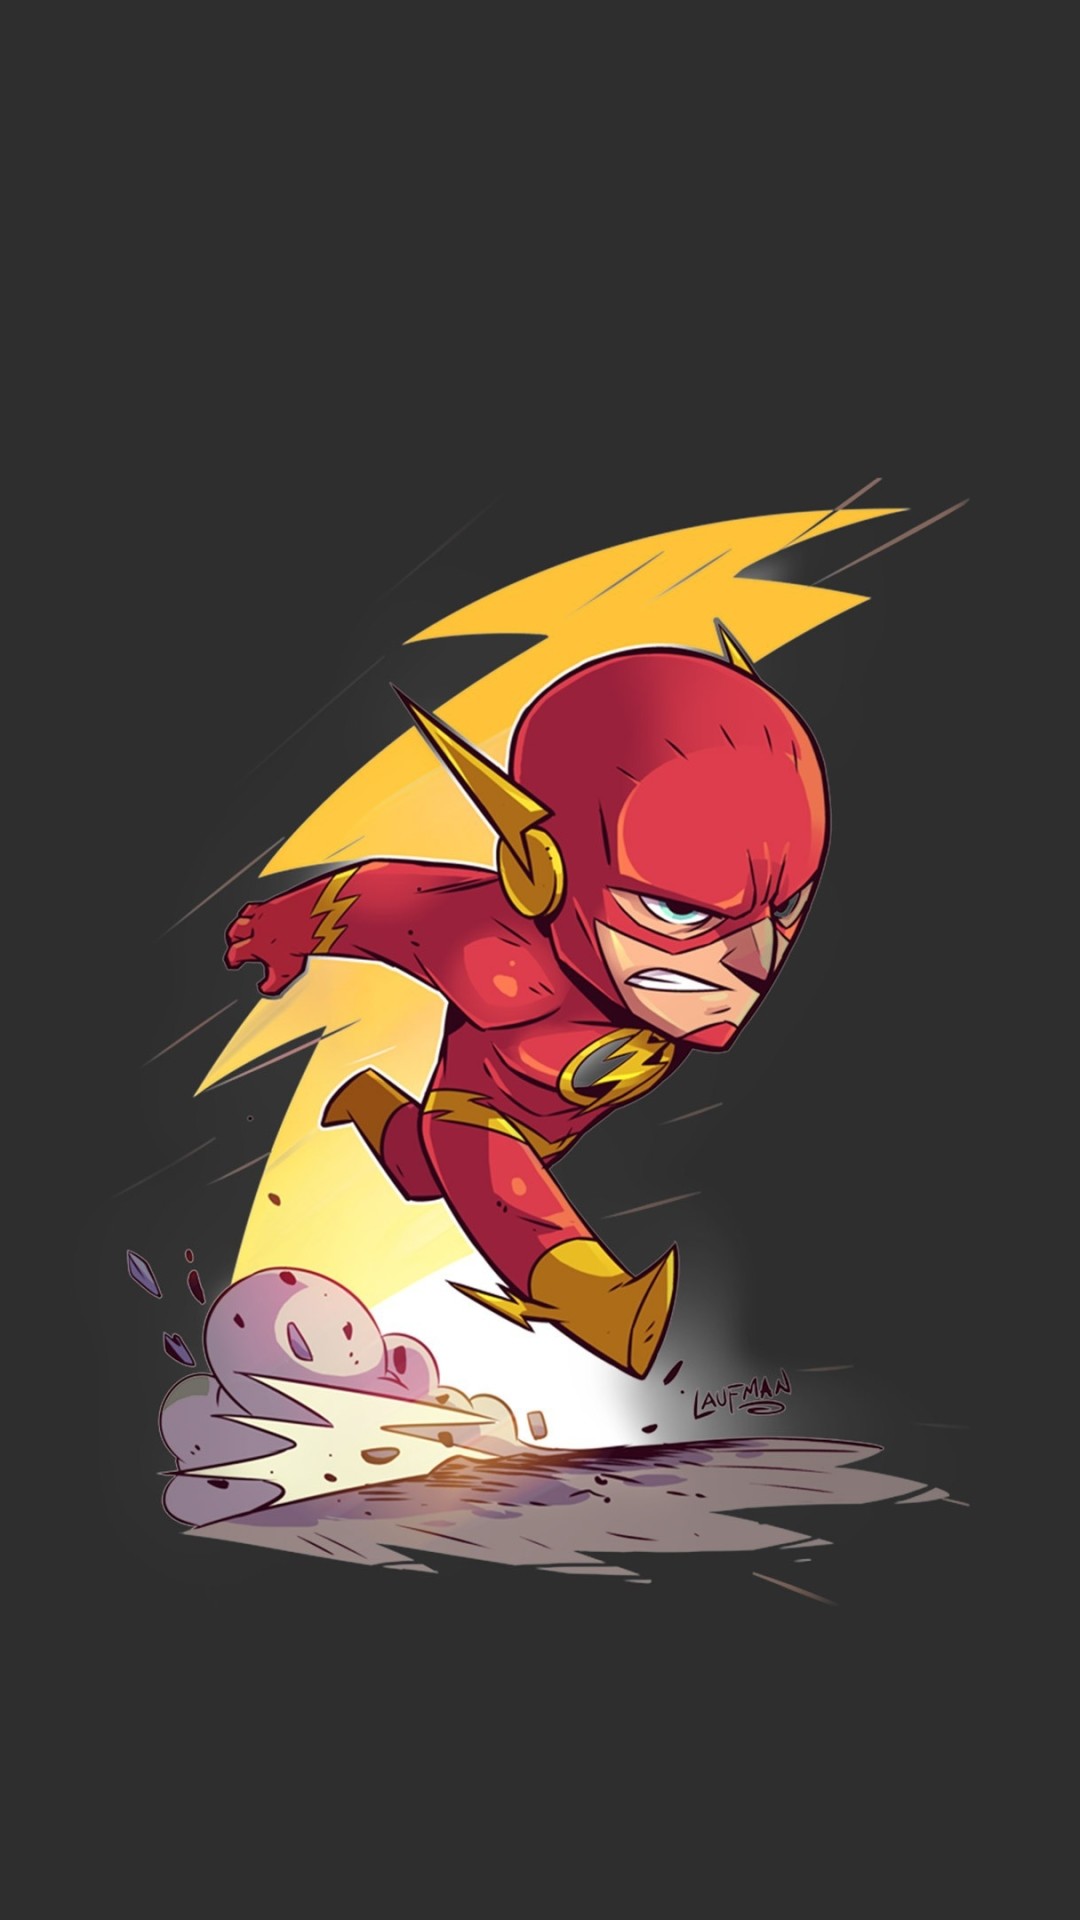 The Flash iPhone Wallpaper Image